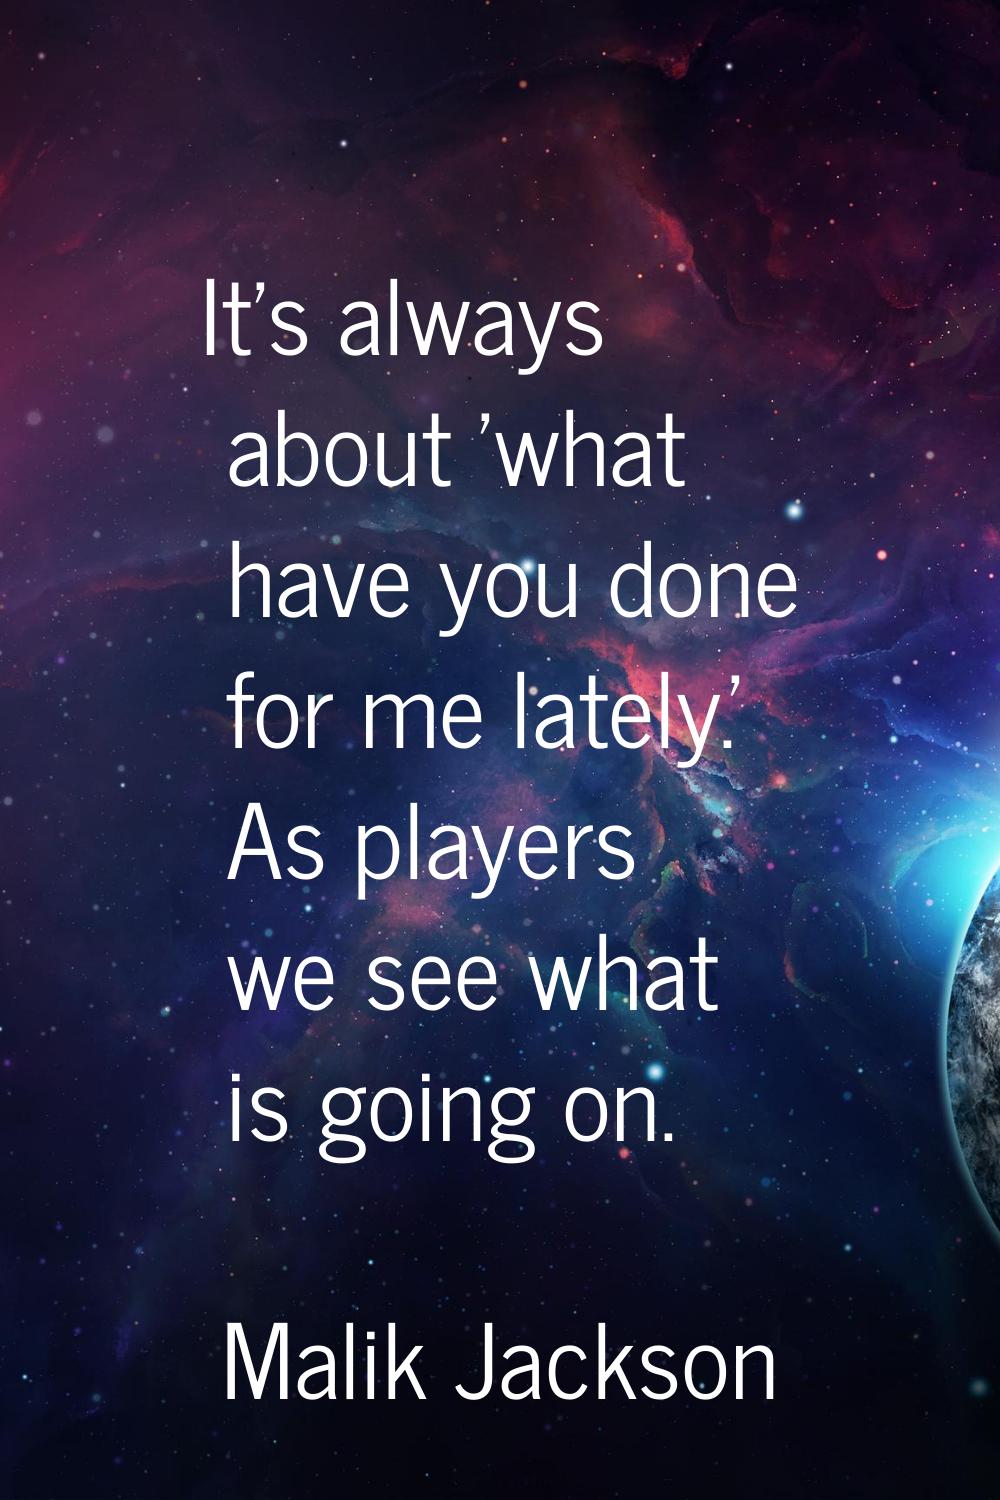 It's always about 'what have you done for me lately.' As players we see what is going on.